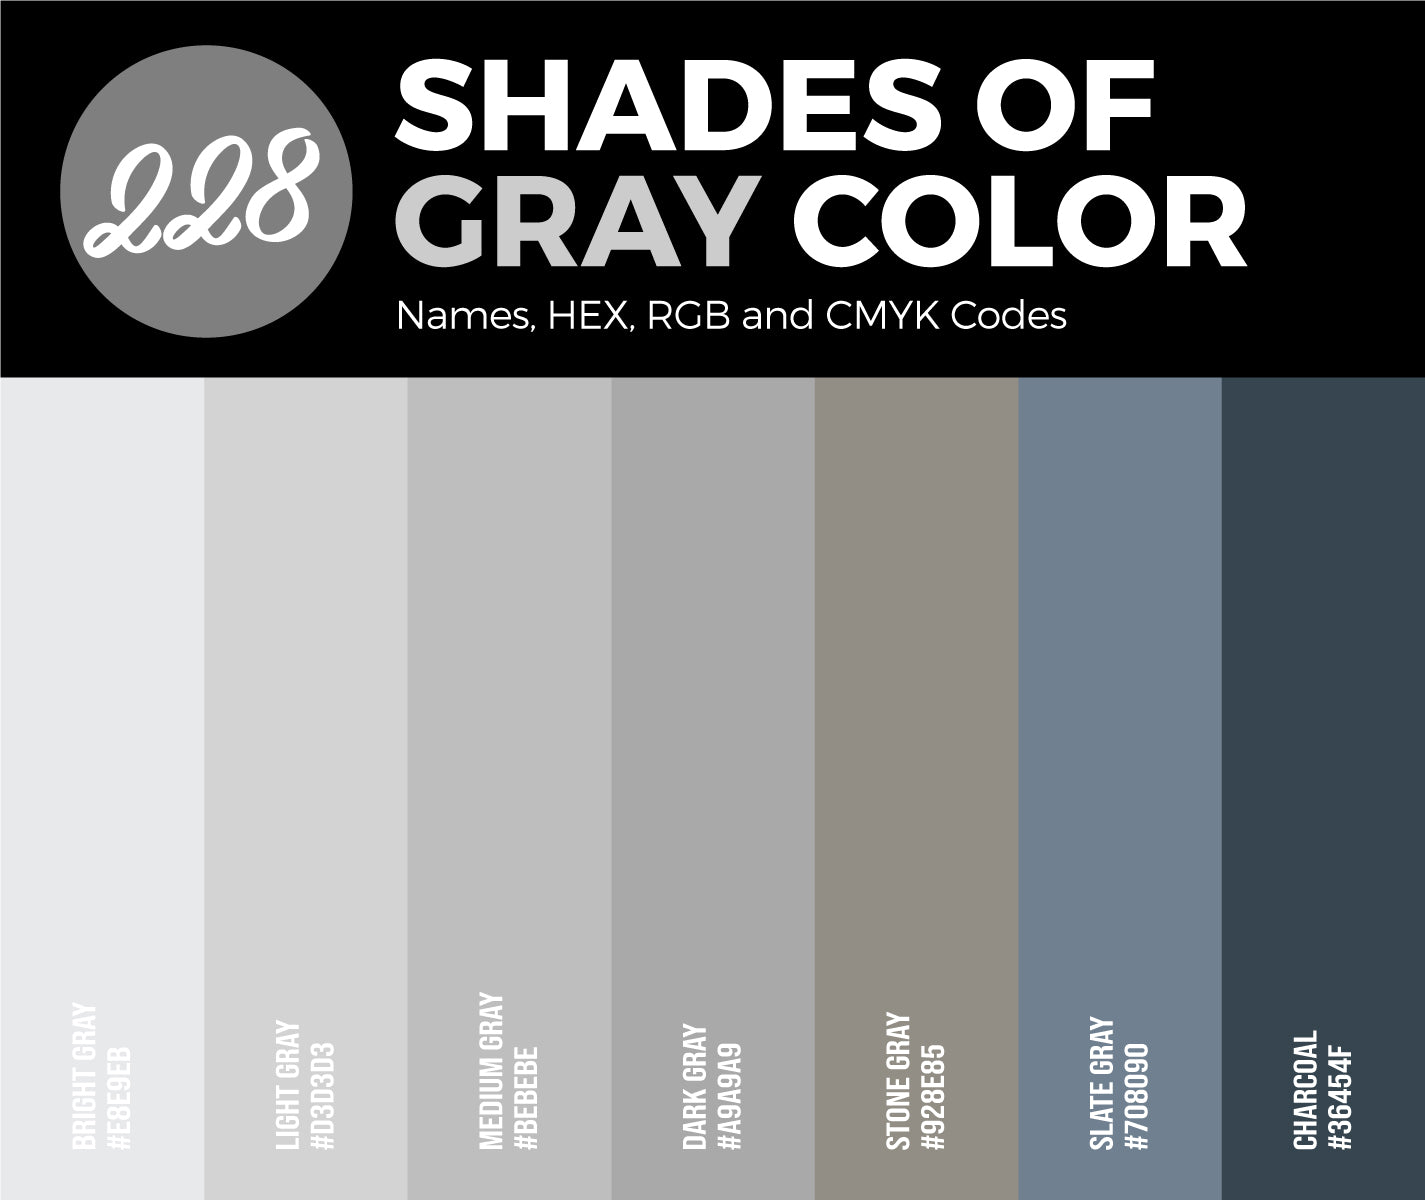 228 Shades Of Gray Color (Names, HEX, RGB, CMYK Codes) –, 50% OFF